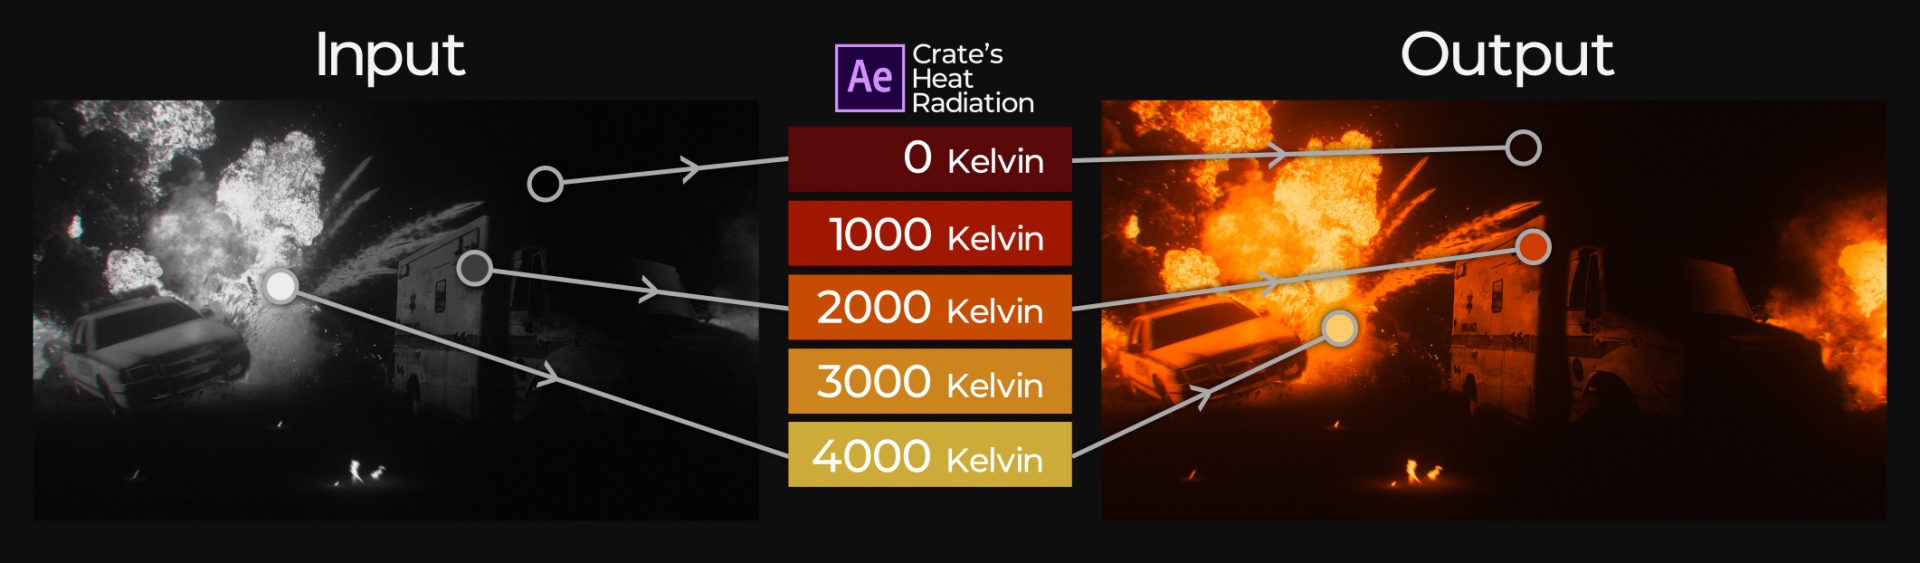 Download the free Heat Radiation plugin for After Effects